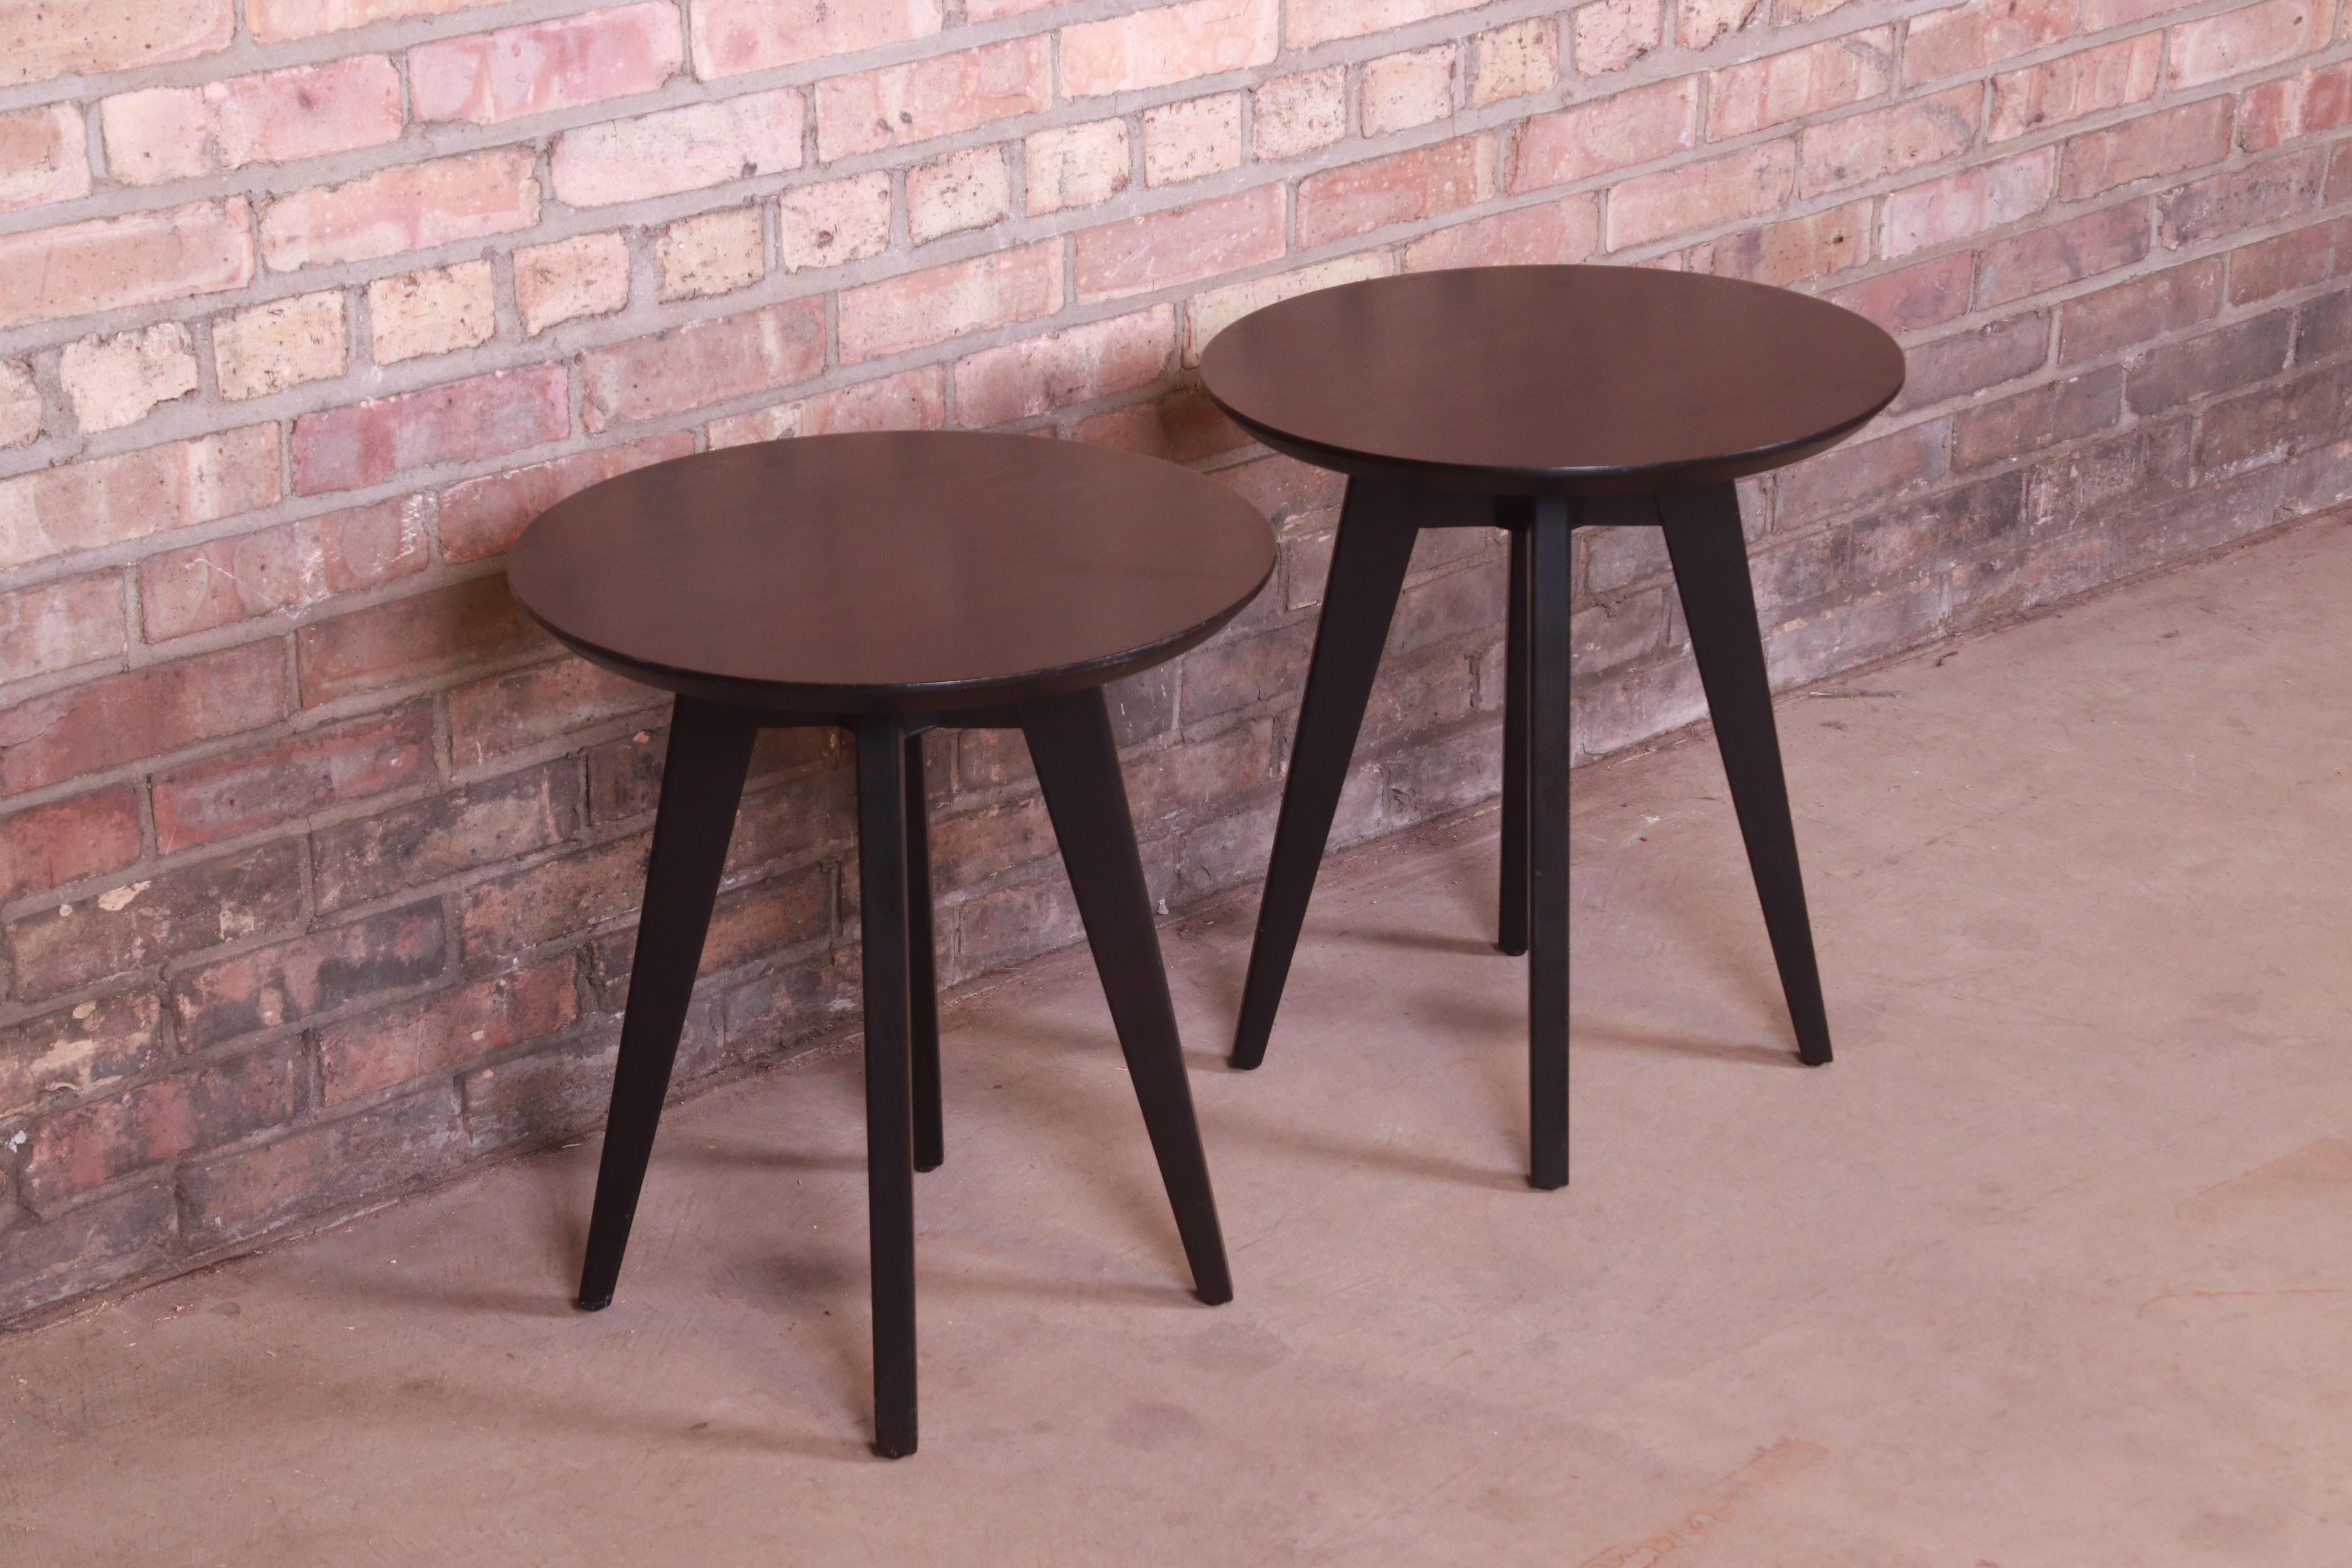 20th Century Jens Risom for Knoll Mid-Century Modern Black Lacquered Side Tables, Pair